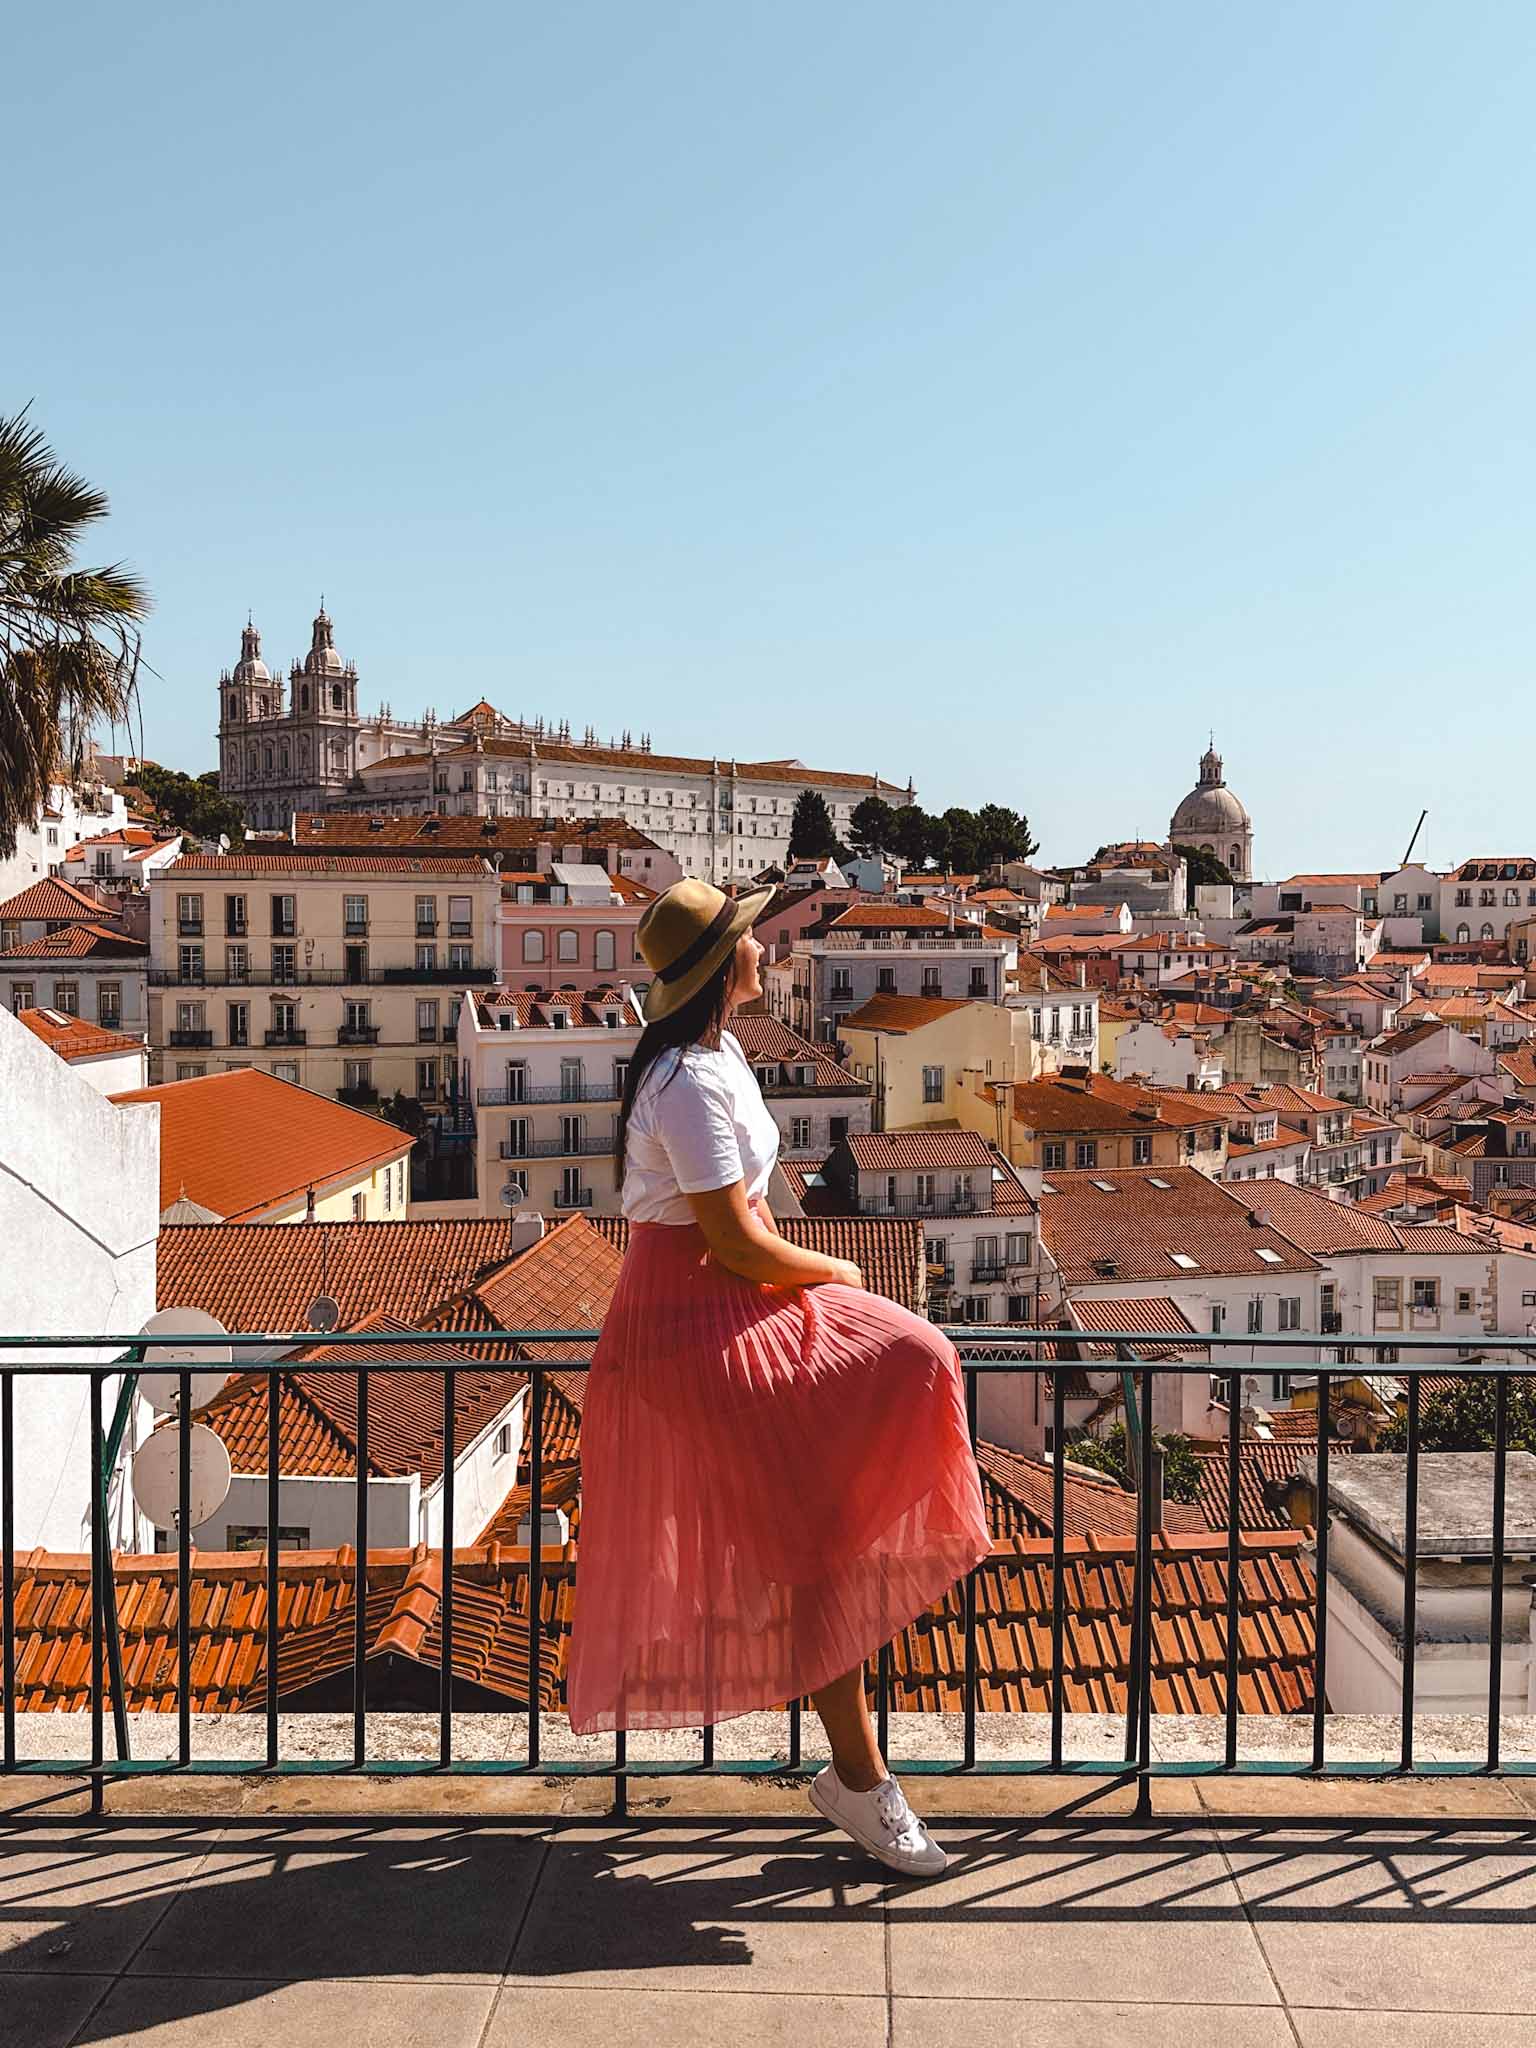 Best viewpoints and rooftops in Lisbon - Miradouro das Portas do Sol